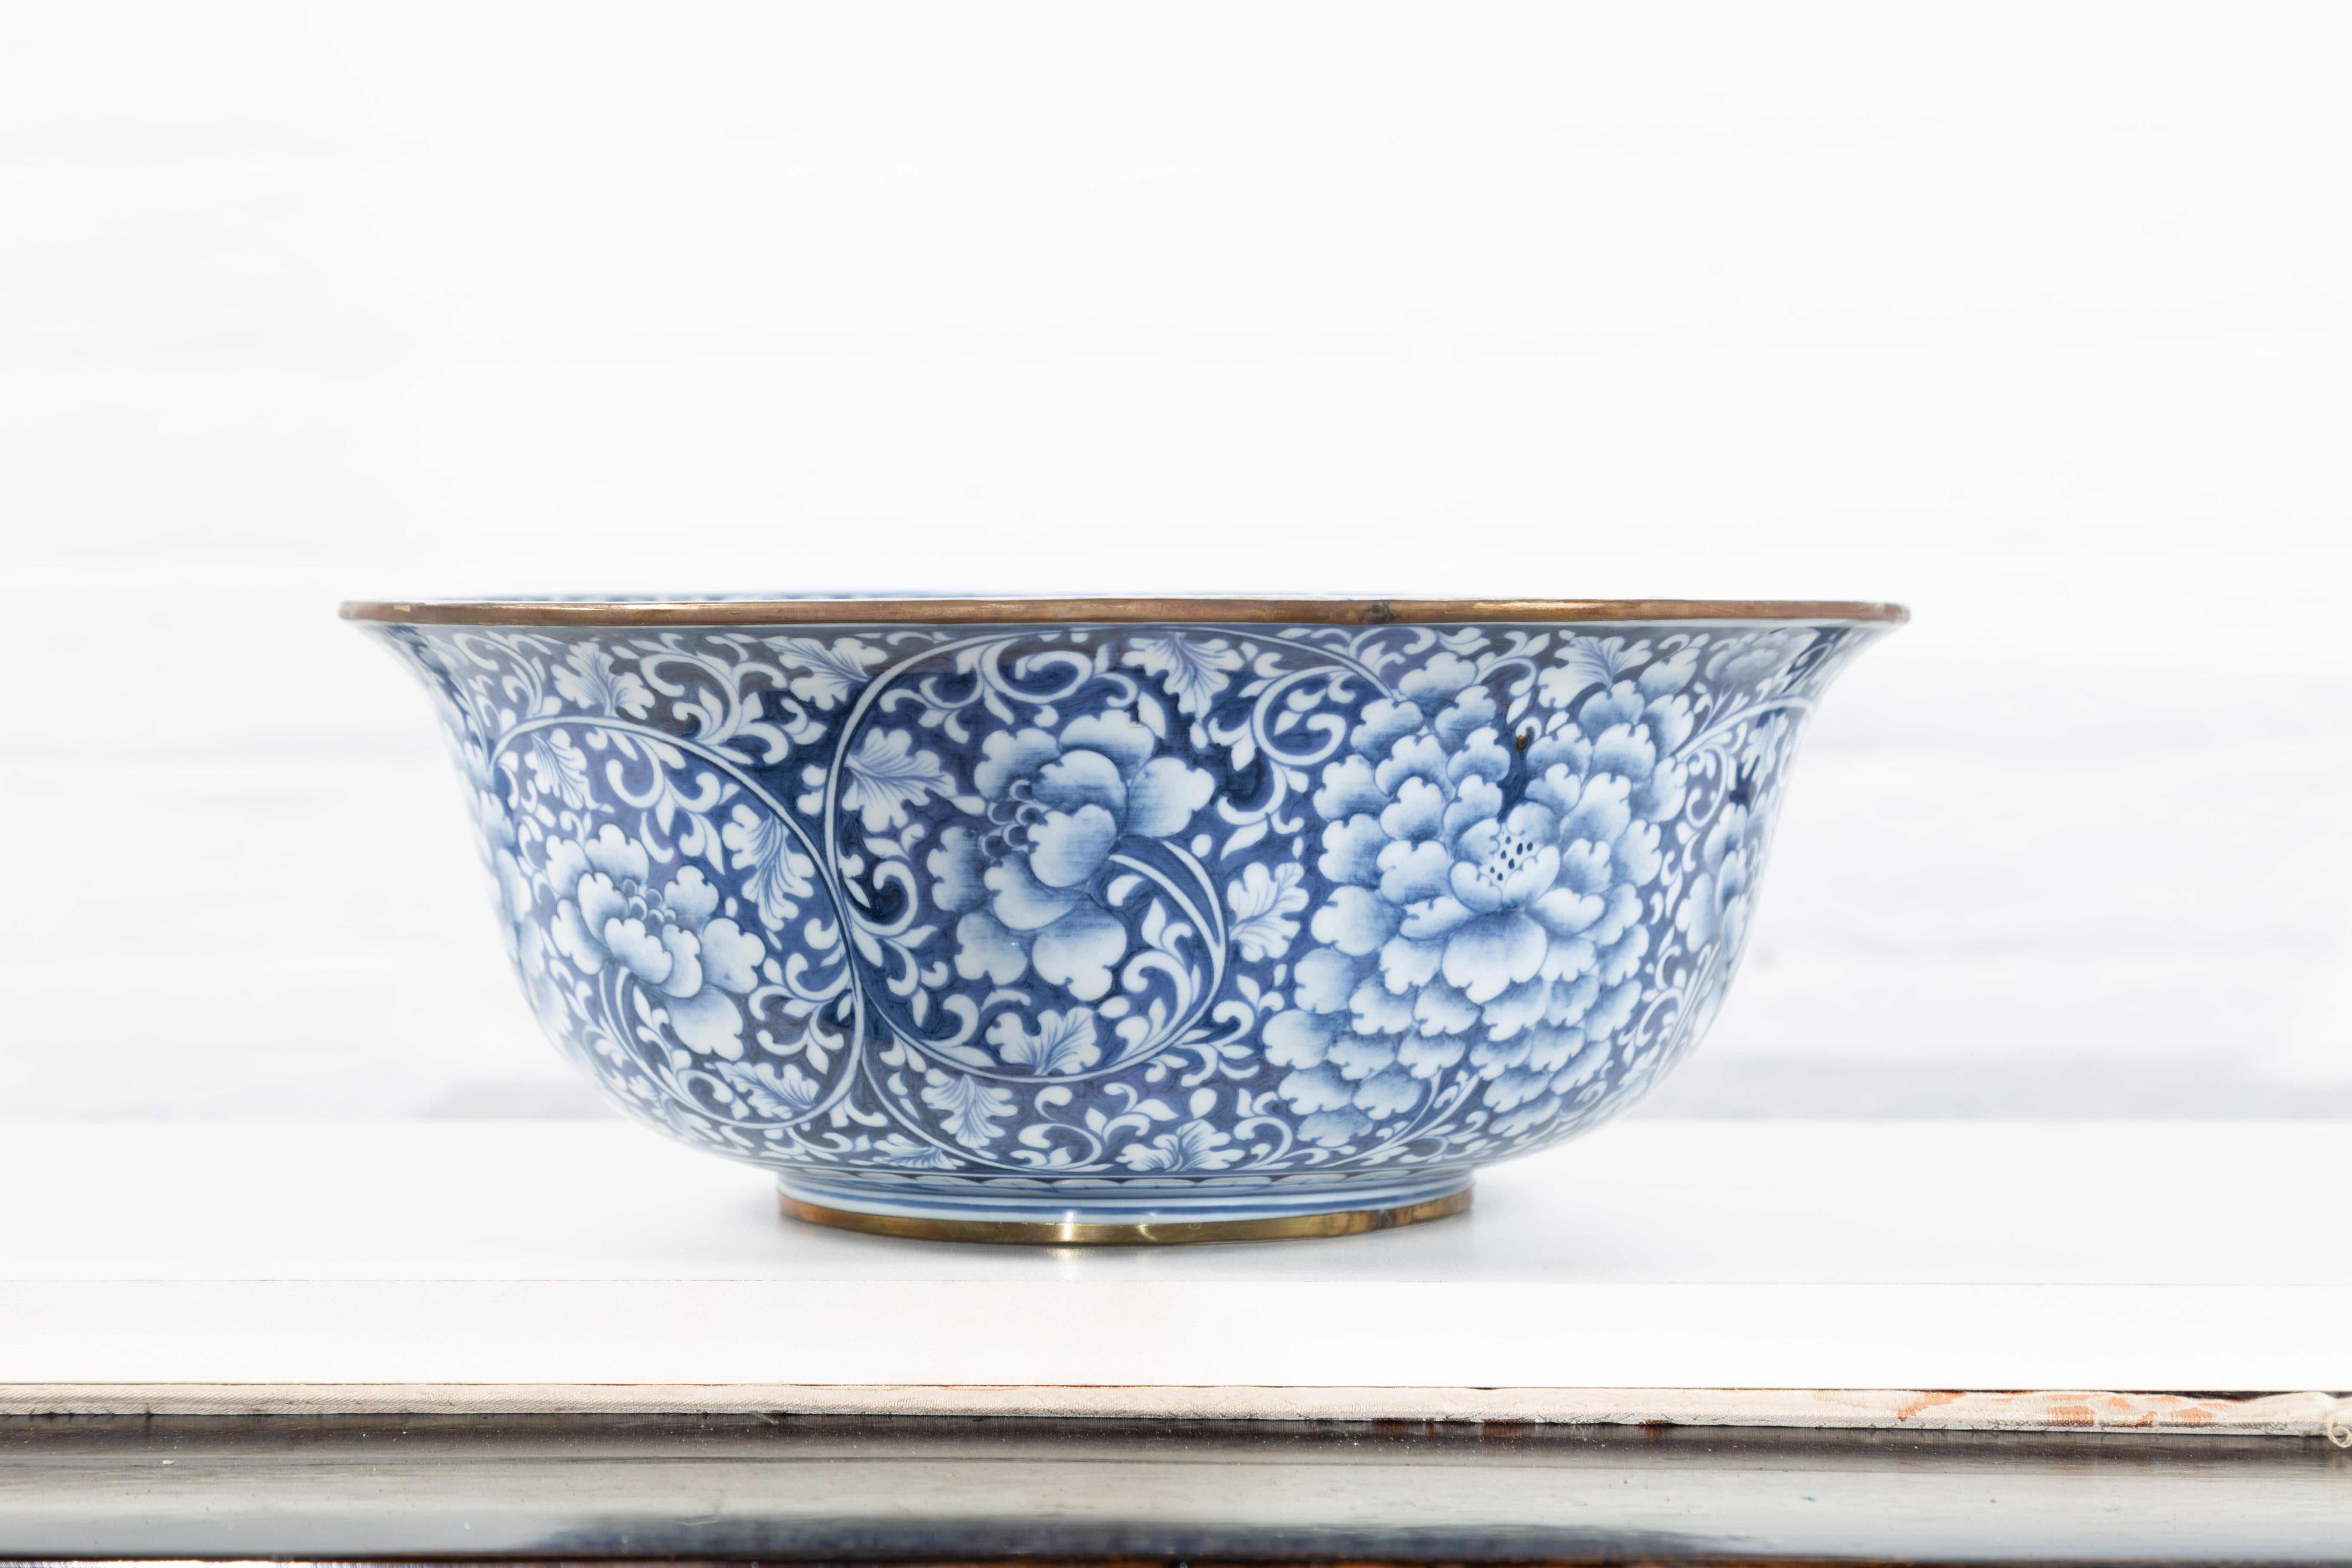 Contemporary Thai Hand-Painted Blue and White Porcelain Bowl with Floral Motifs 9